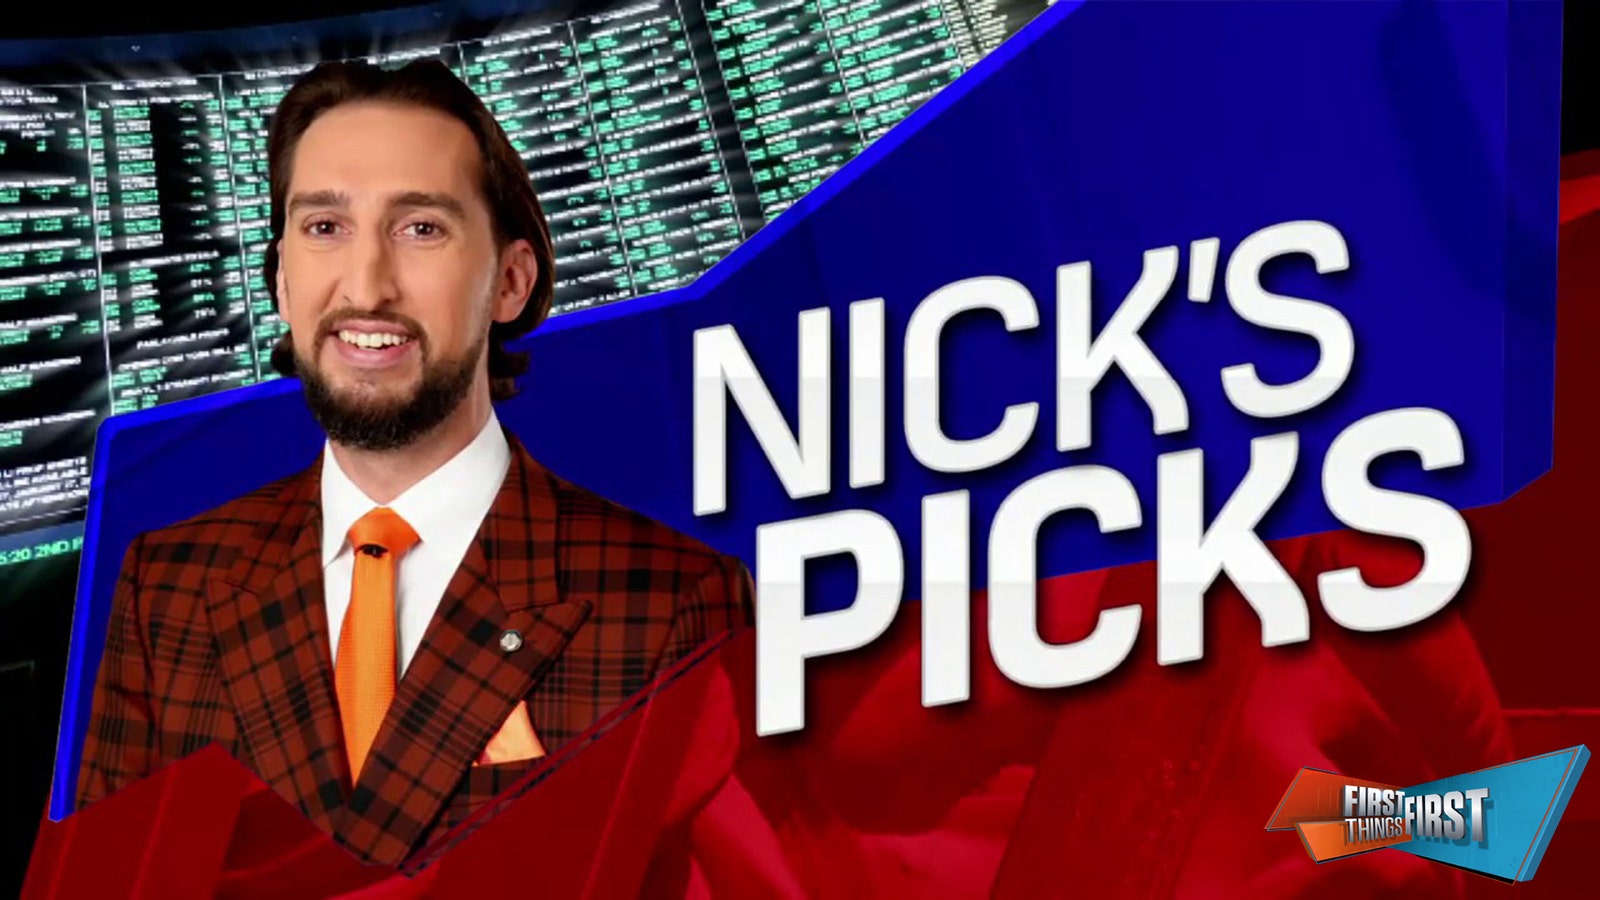 Chiefs featured in Nick Wright's Week 9 NFL picks 